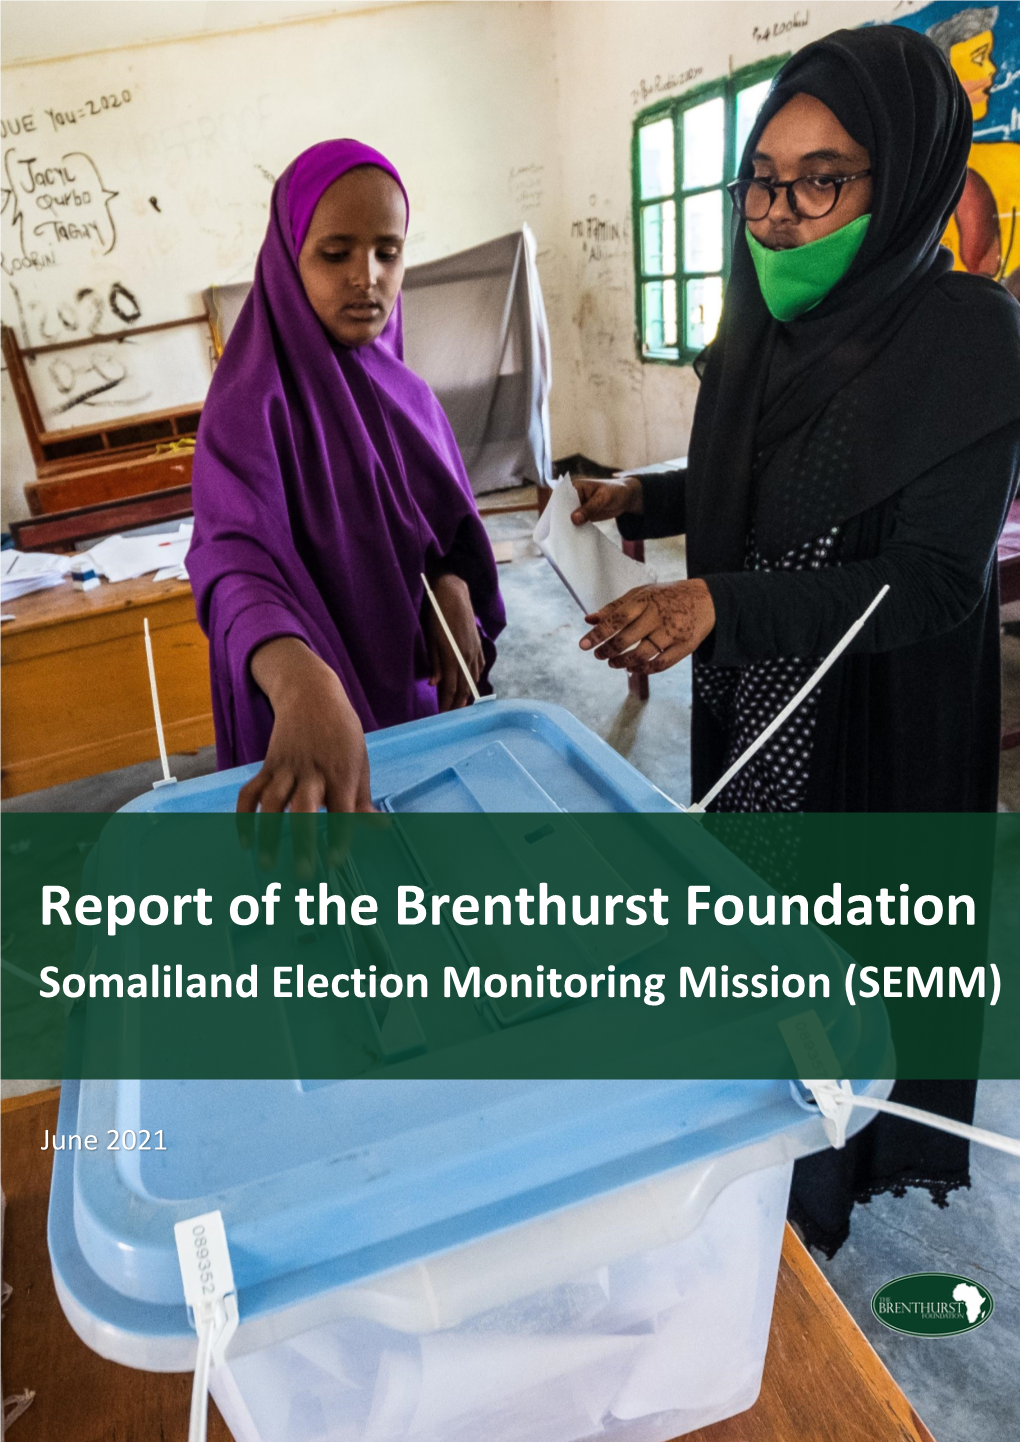 Report of the Brenthurst Foundation Somaliland Election Monitoring Mission (SEMM)